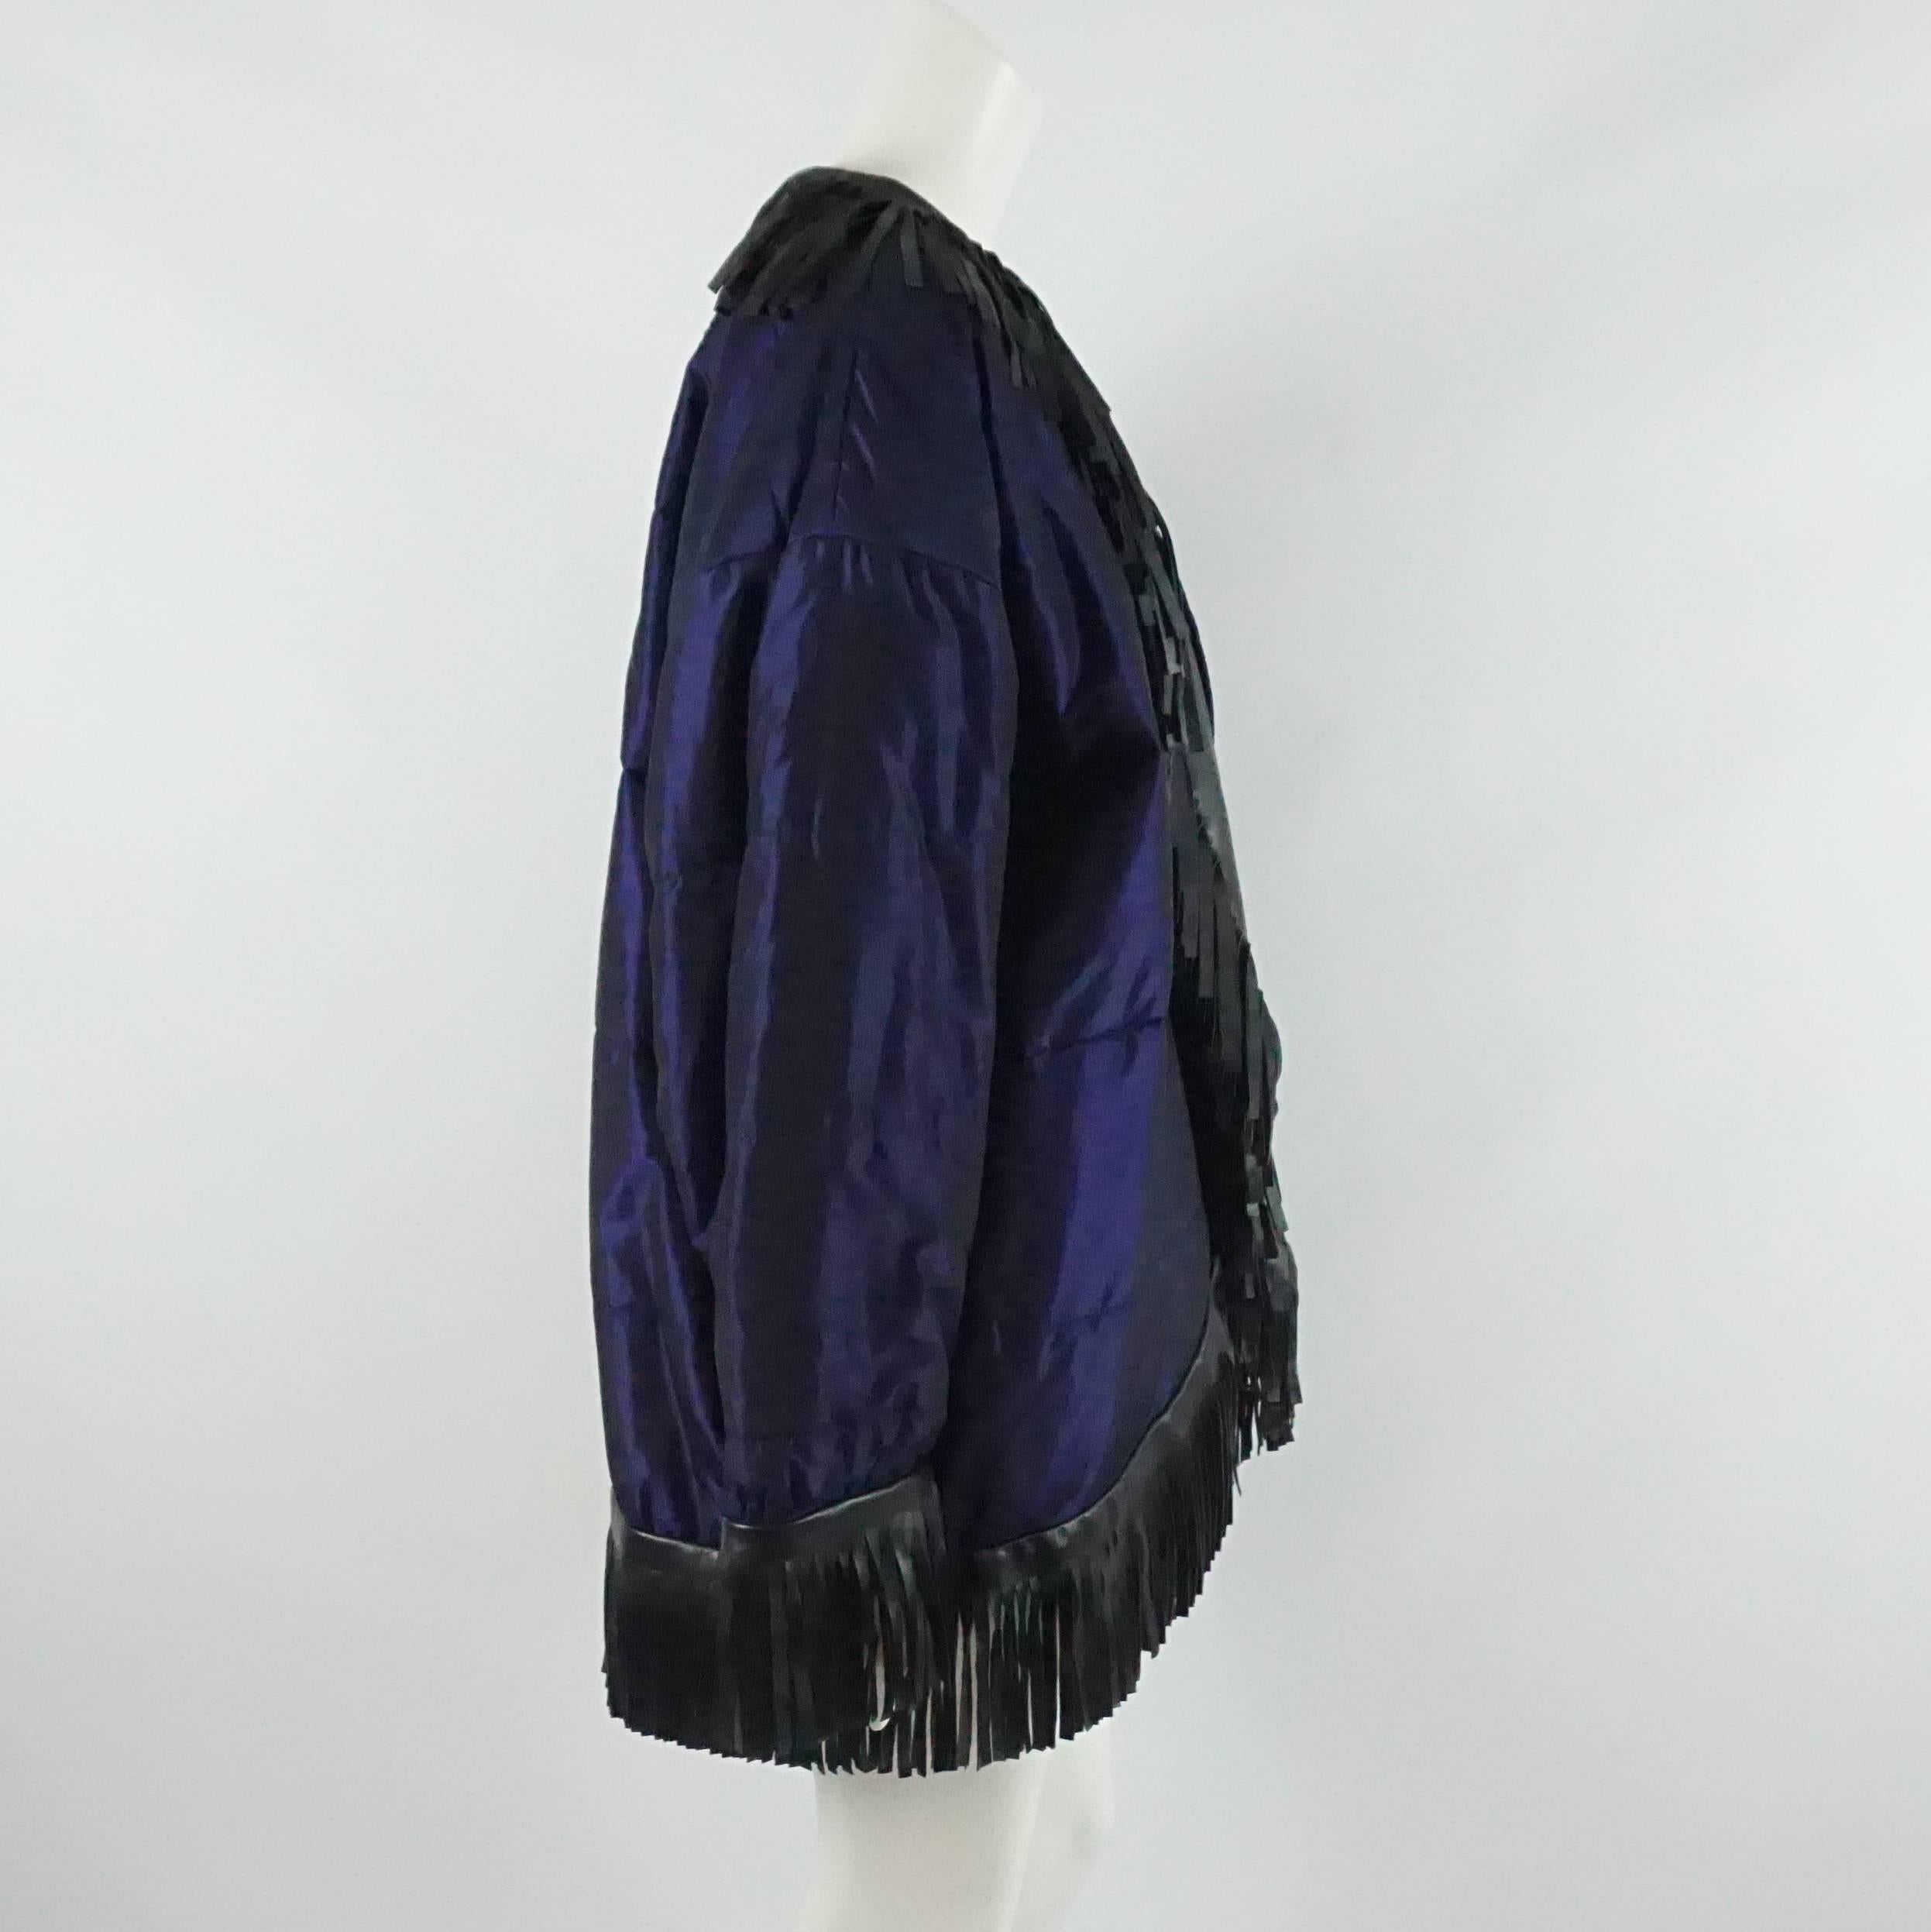 YSL Blue Puffer Coat with Black Fringe Trim - 40 - 1980's. This piece is truly spectacular and a great way to spice up a winter outfit. The jacket is has a blue-purple hue with a slight sheen. It features a leather fringe trim, shoulder pads, and an